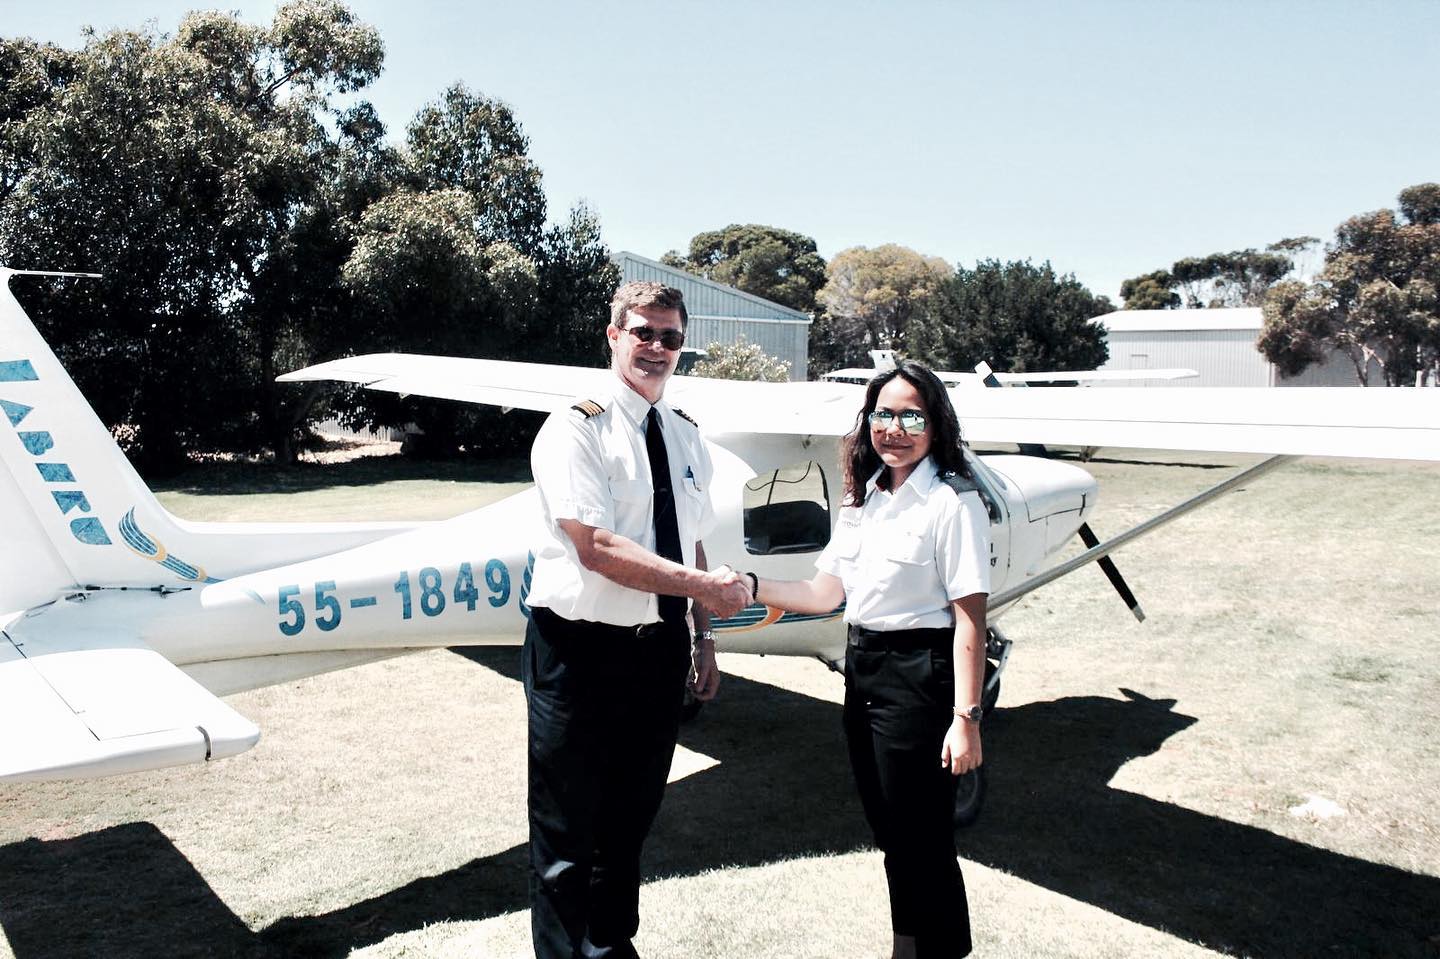 Haazeqah Shah shakes hands with an aviation instructor in Australia. Photo: Aeroviation Singapore/Facebook